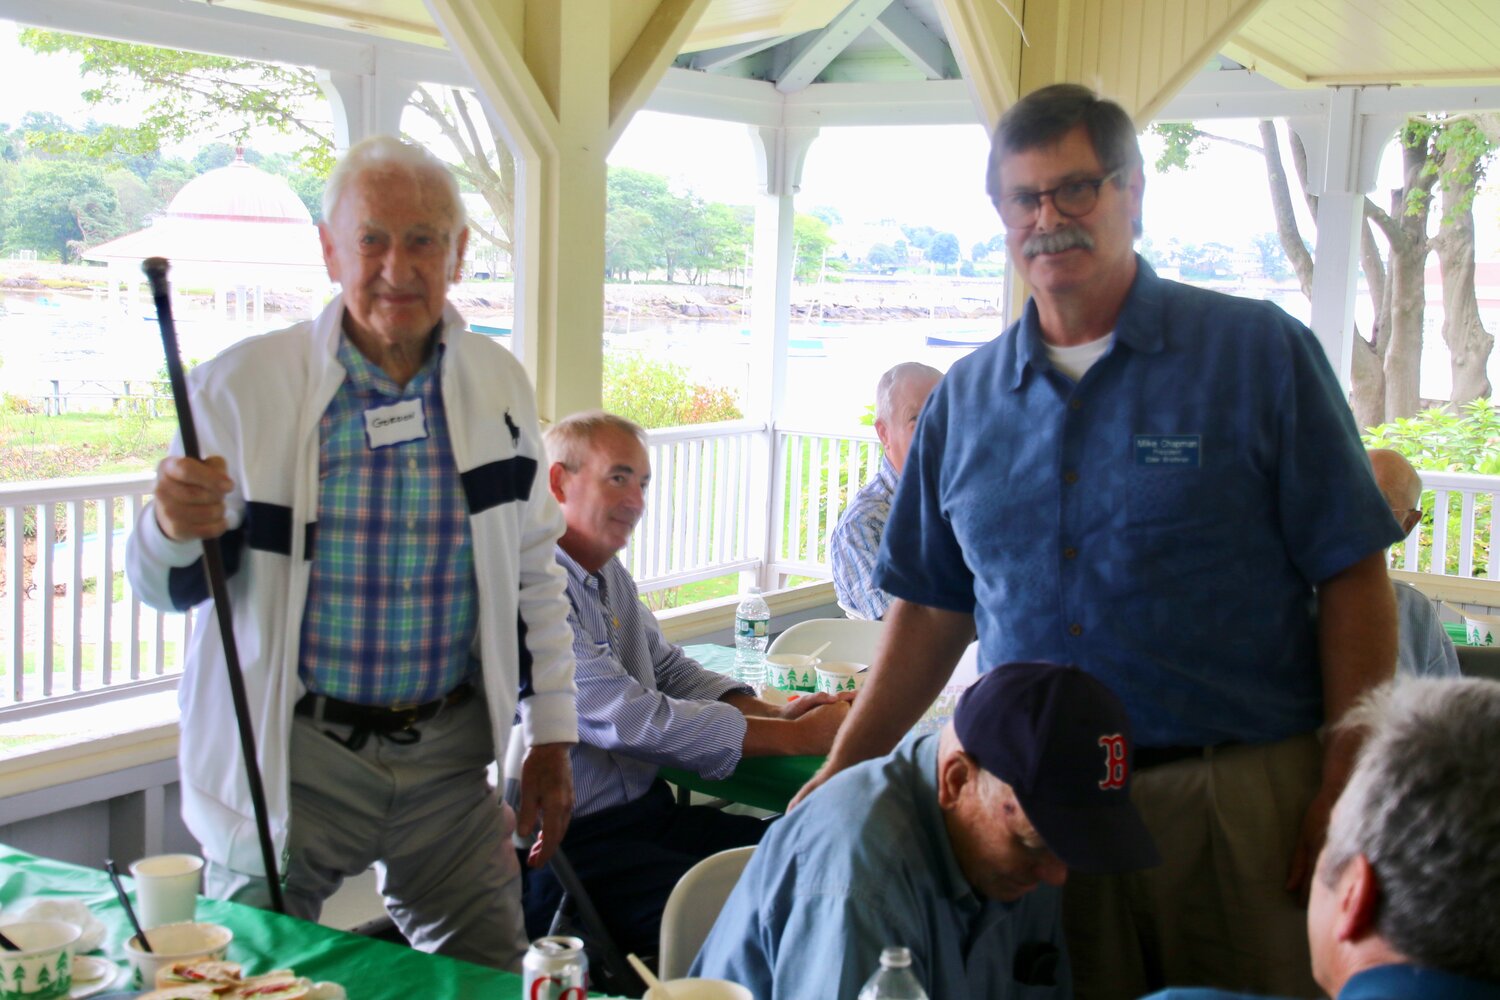 Gordon MacDoughal, Manchester's eldest male resident, receives the Elder Brethren Cane from Mike Chapman at the 2021 annual "Old Man's Picnic" at Tuck's Point.